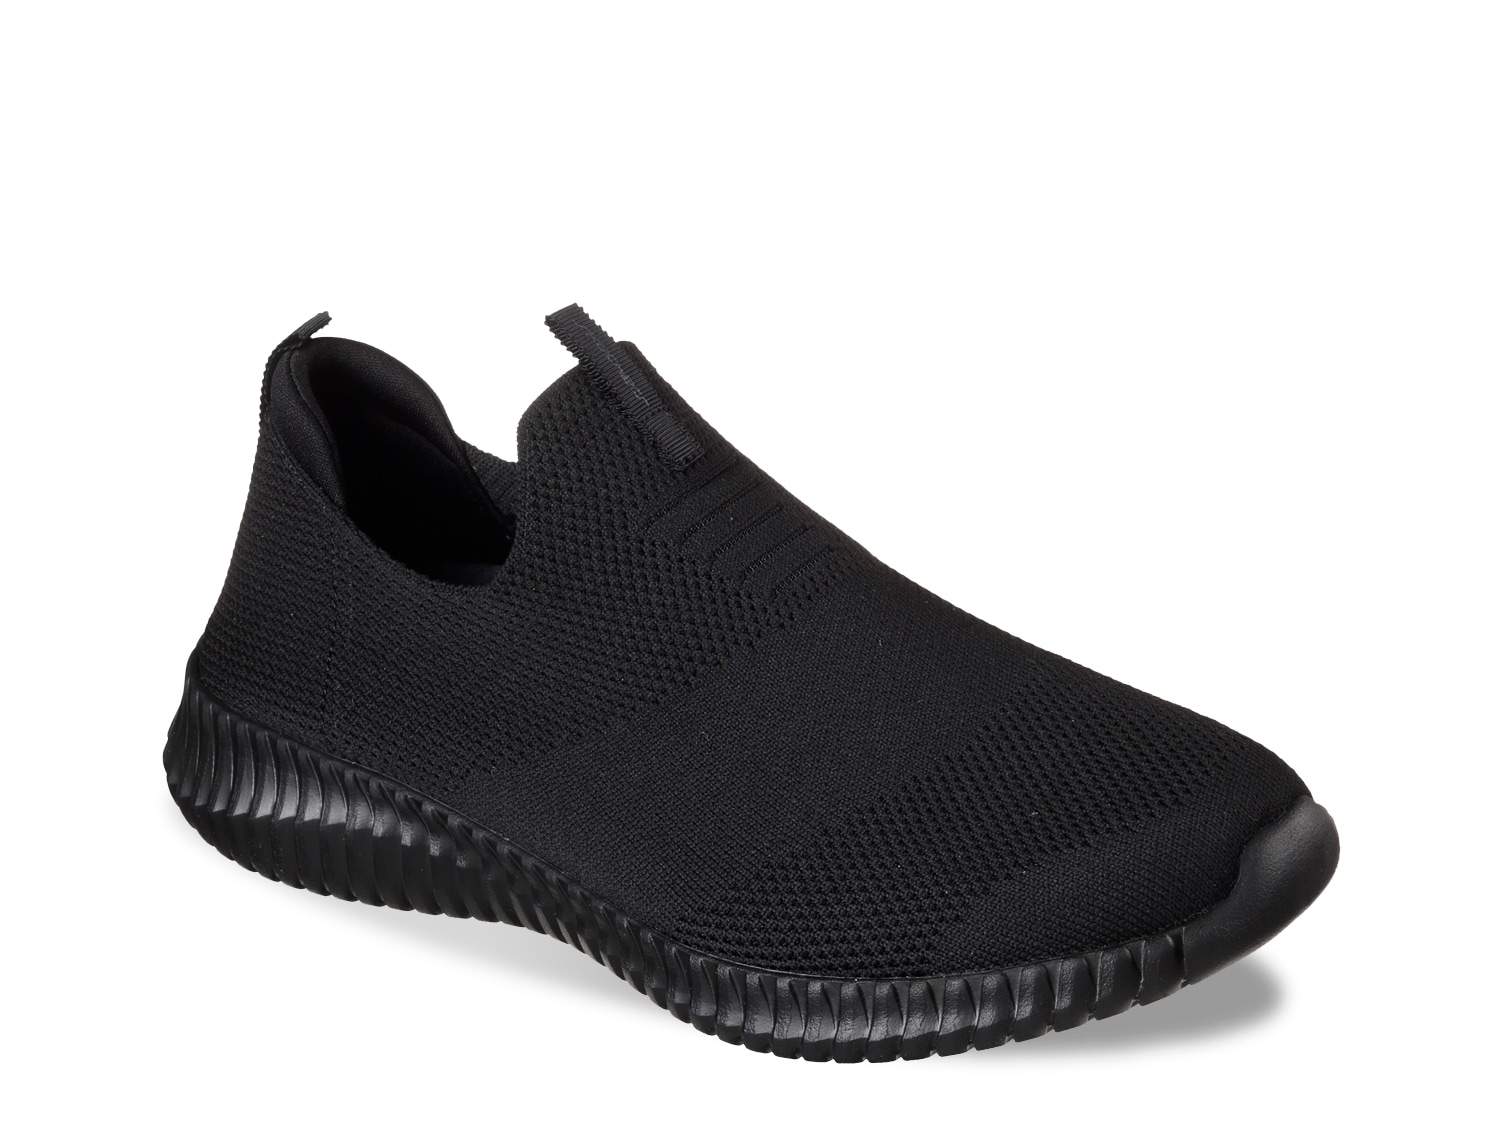 mens wide slip on tennis shoes